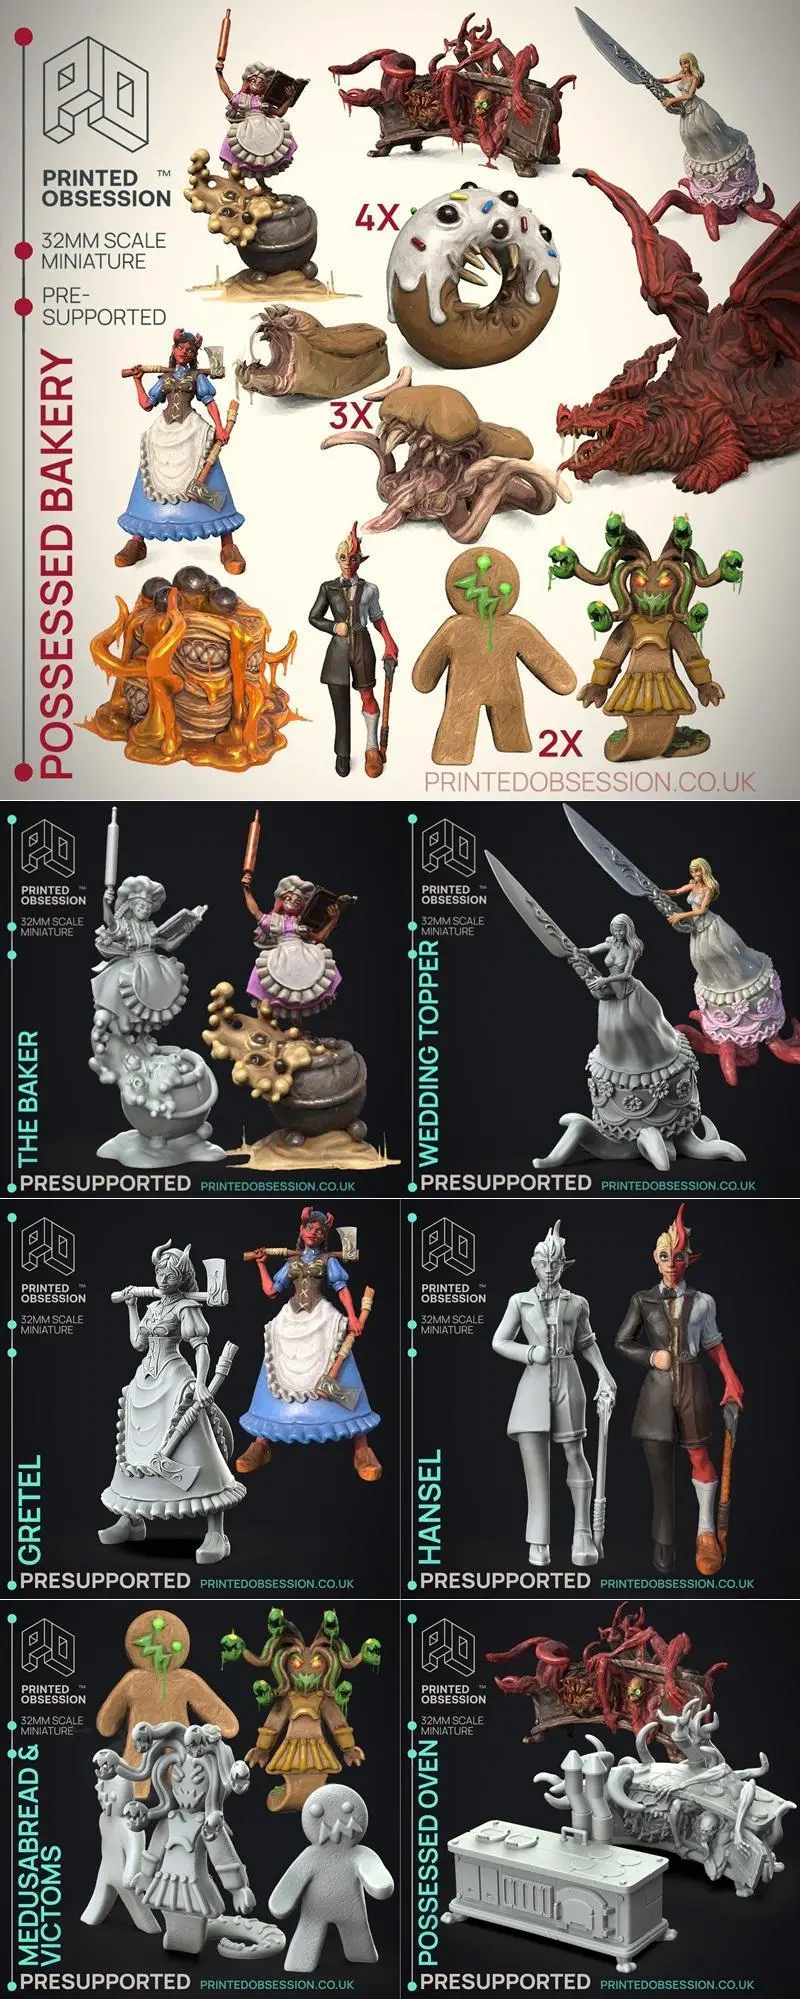 Printed Obsession - Possessed Bakery